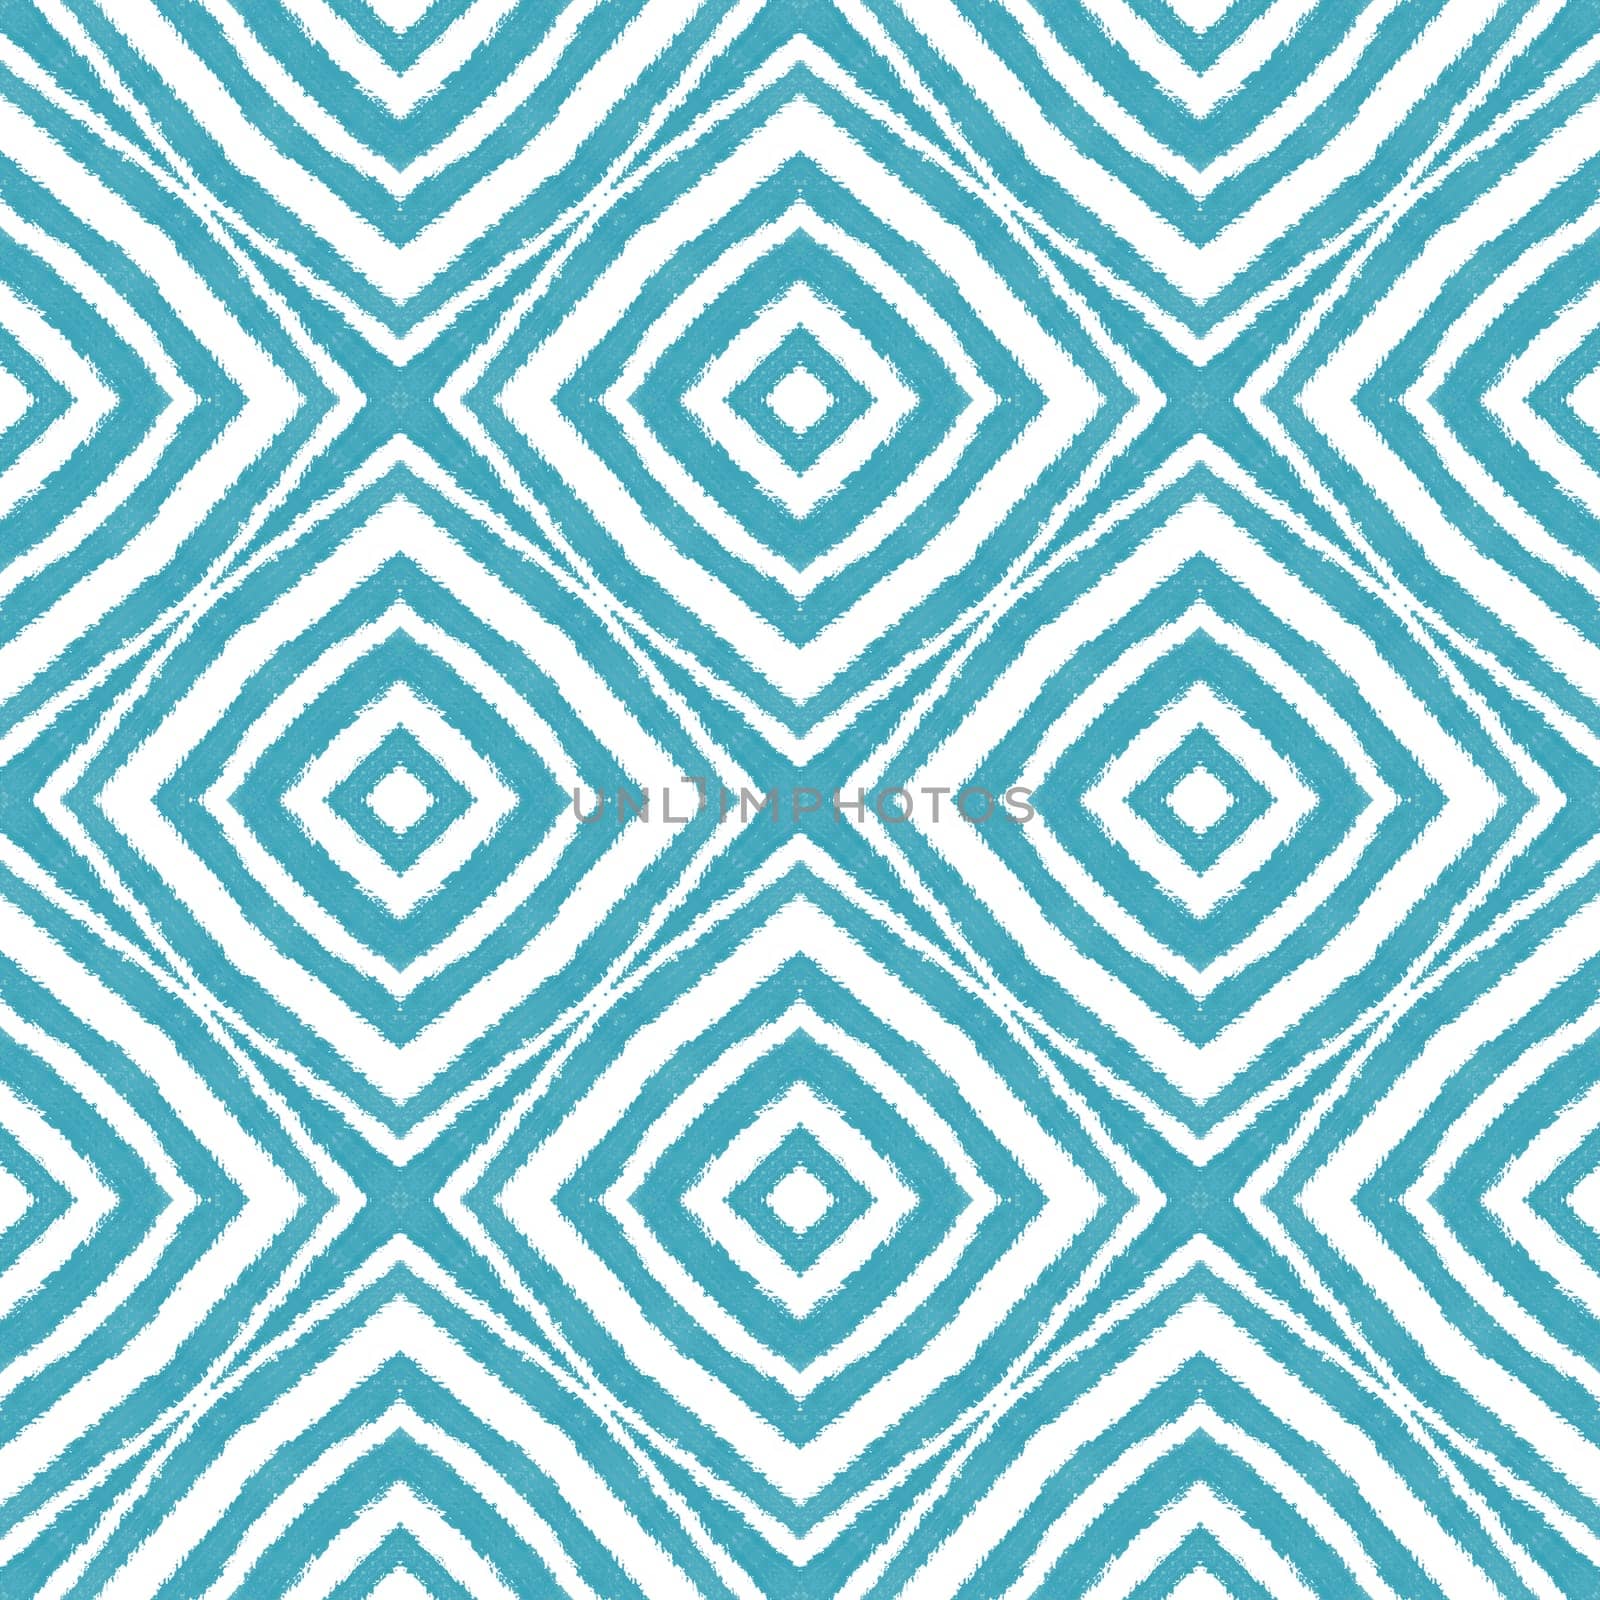 Tiled watercolor pattern. Turquoise symmetrical by beginagain